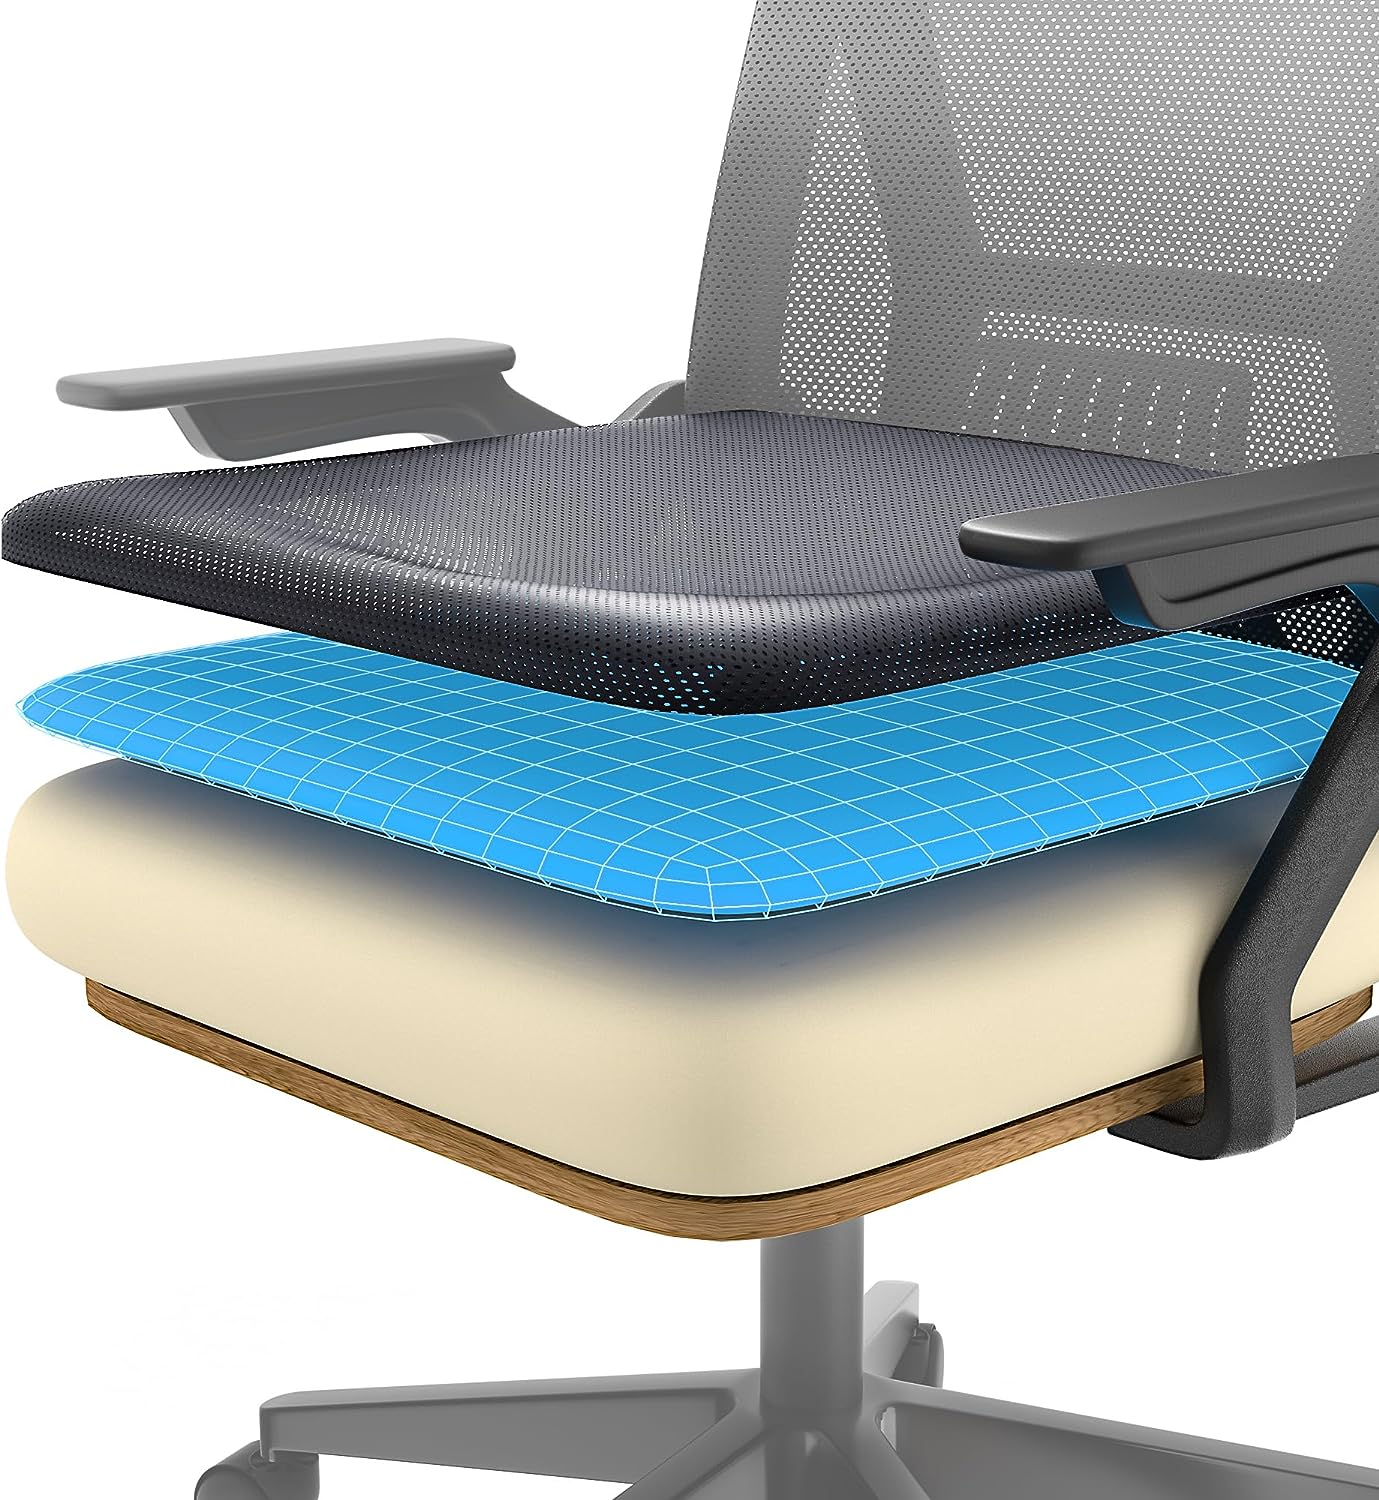 Office Chair Mesh Back Support - Office Chair Lumber Support